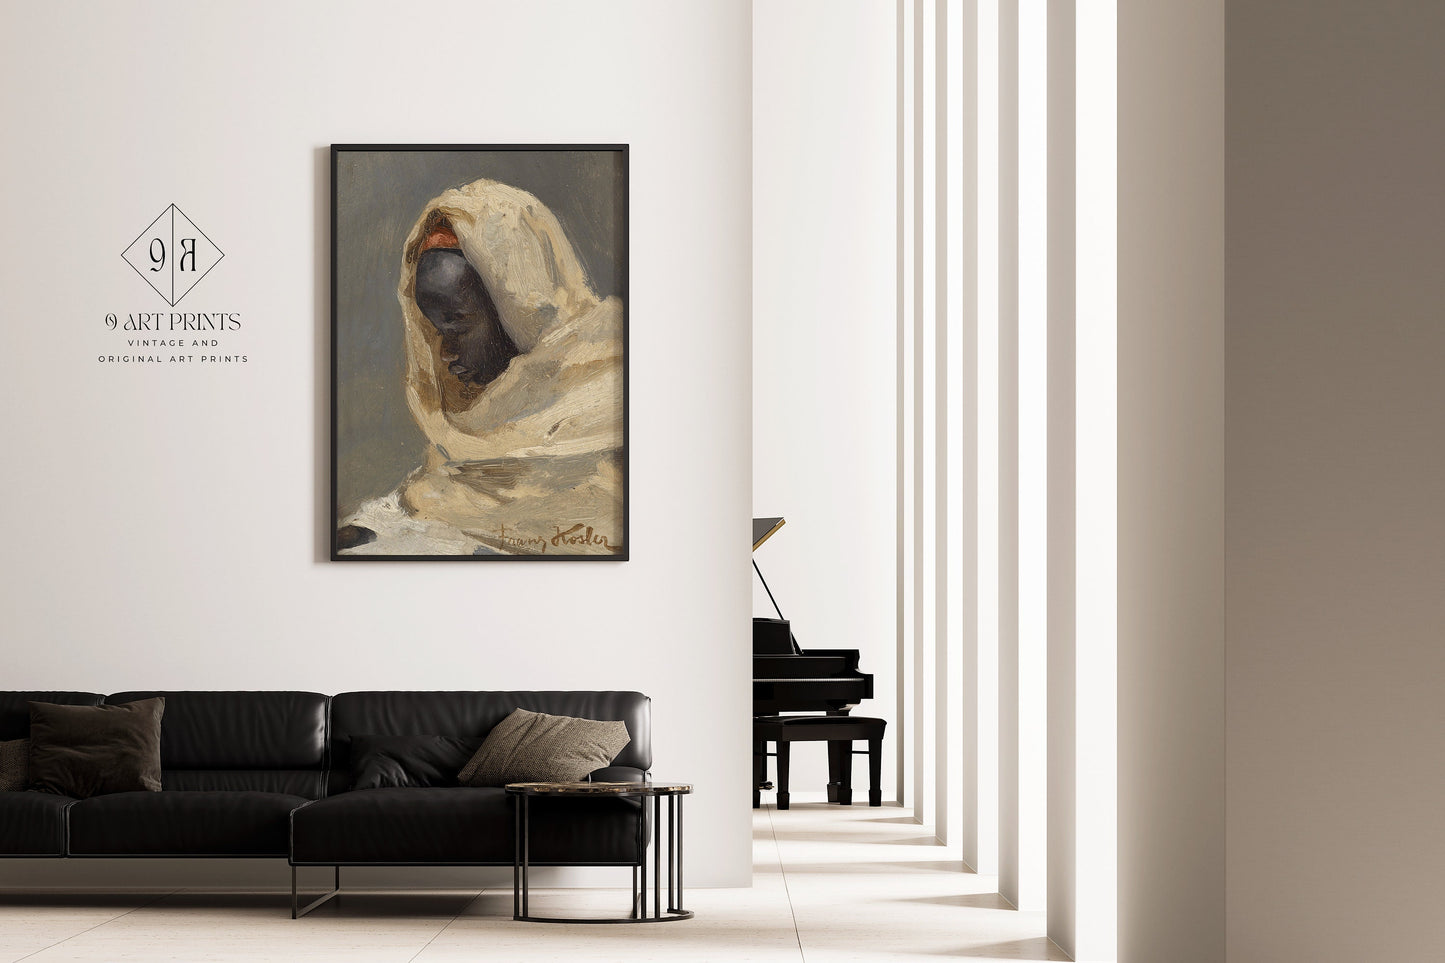 Franz Xaver Kosler A Bedouin Man Orientalist Fine Art Famous Iconic Painting Vintage Ready to hang Framed Home Office Decor Print Gift Idea